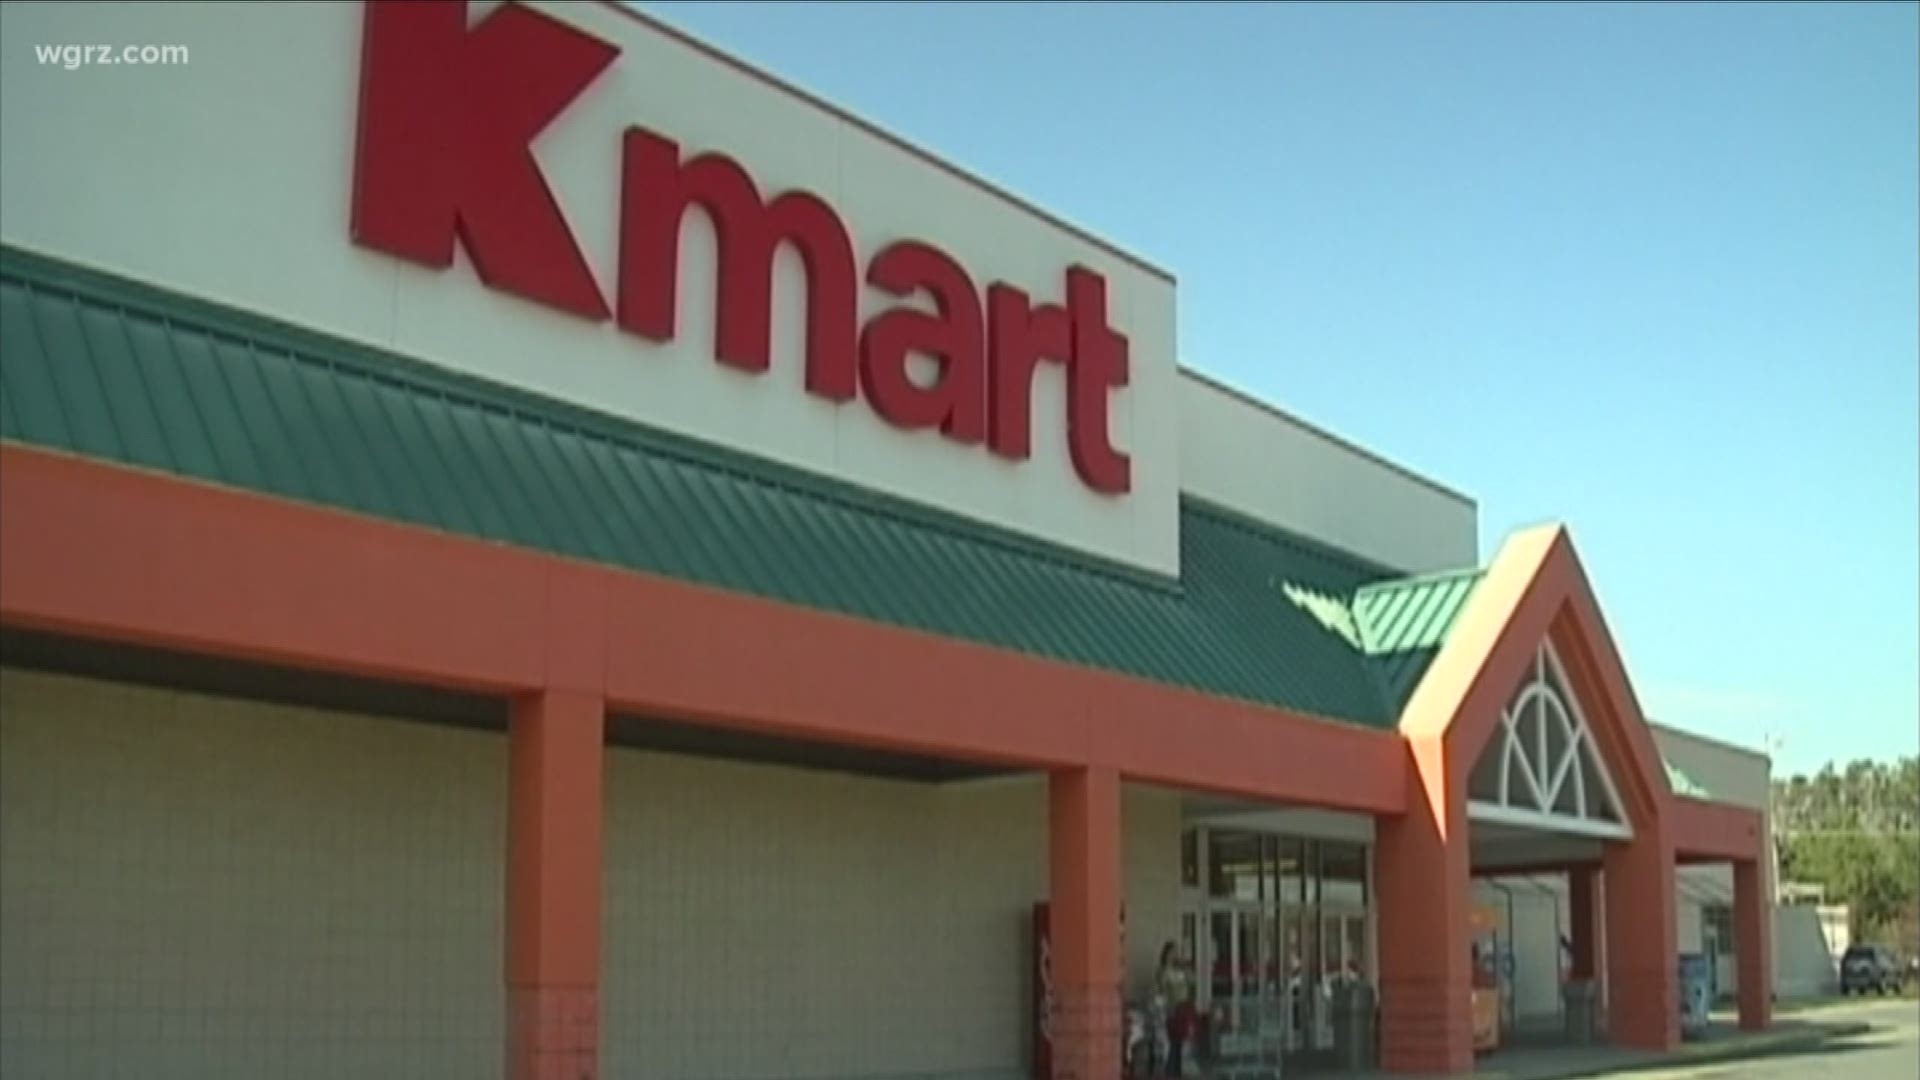 Only two K-mart remain in WNY